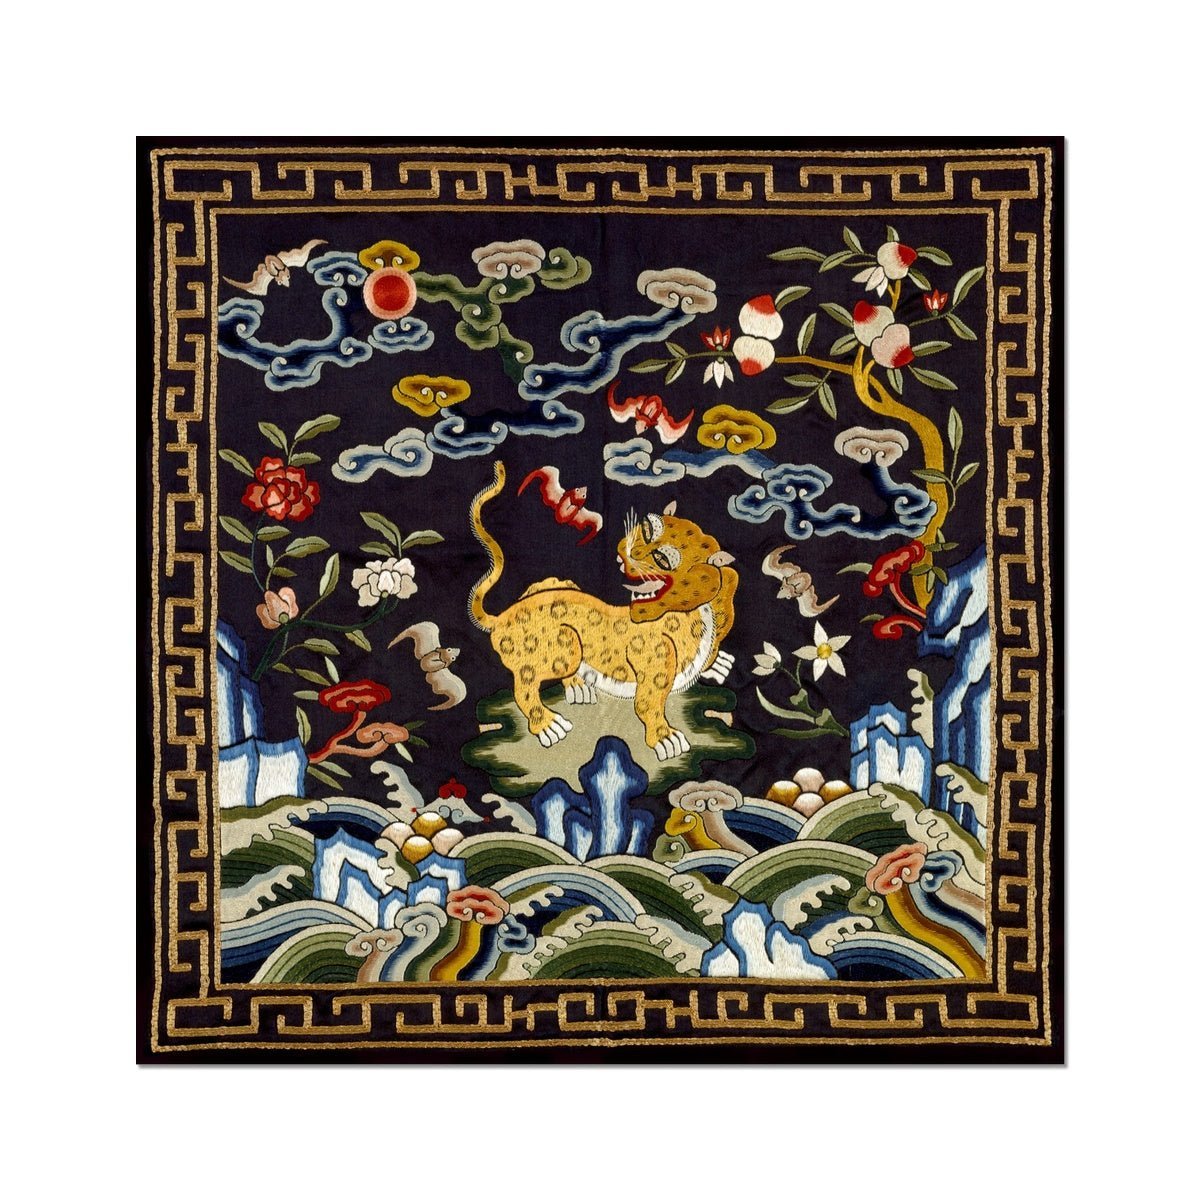 Chinese Silk Embroidery Leopard Panther Tiger Mandarin Square Qing Dyn -  Sacred Surreal